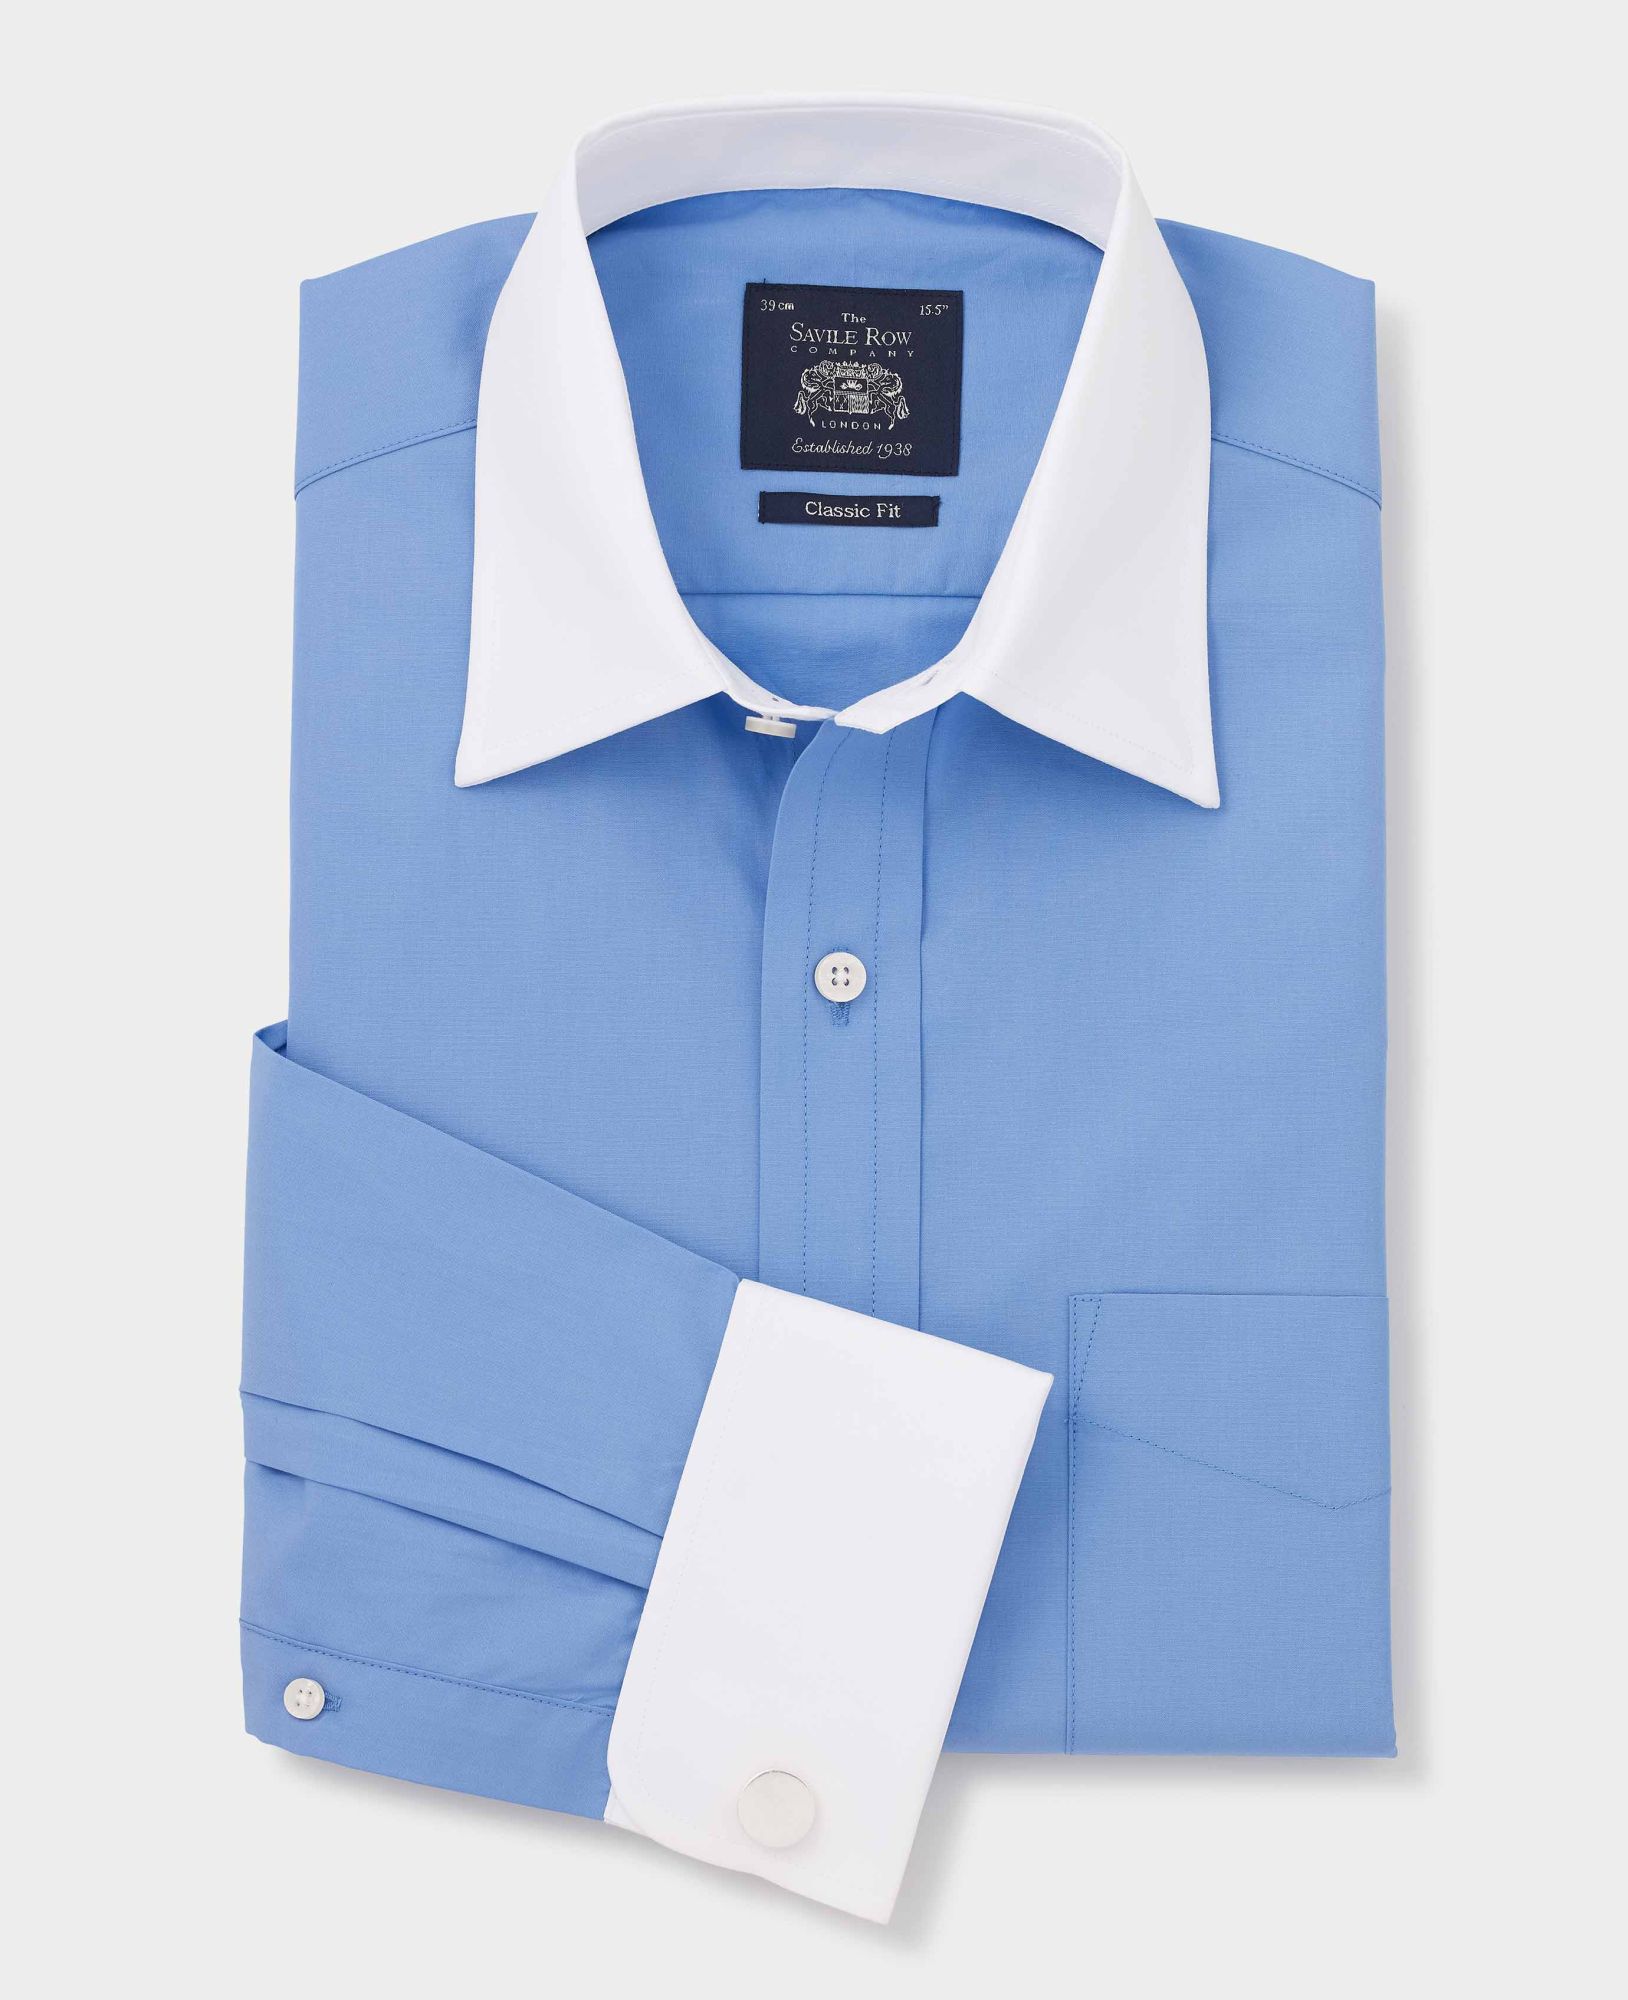 French Blue Classic Fit Shirt With White Collar & Cuffs 18 1/2